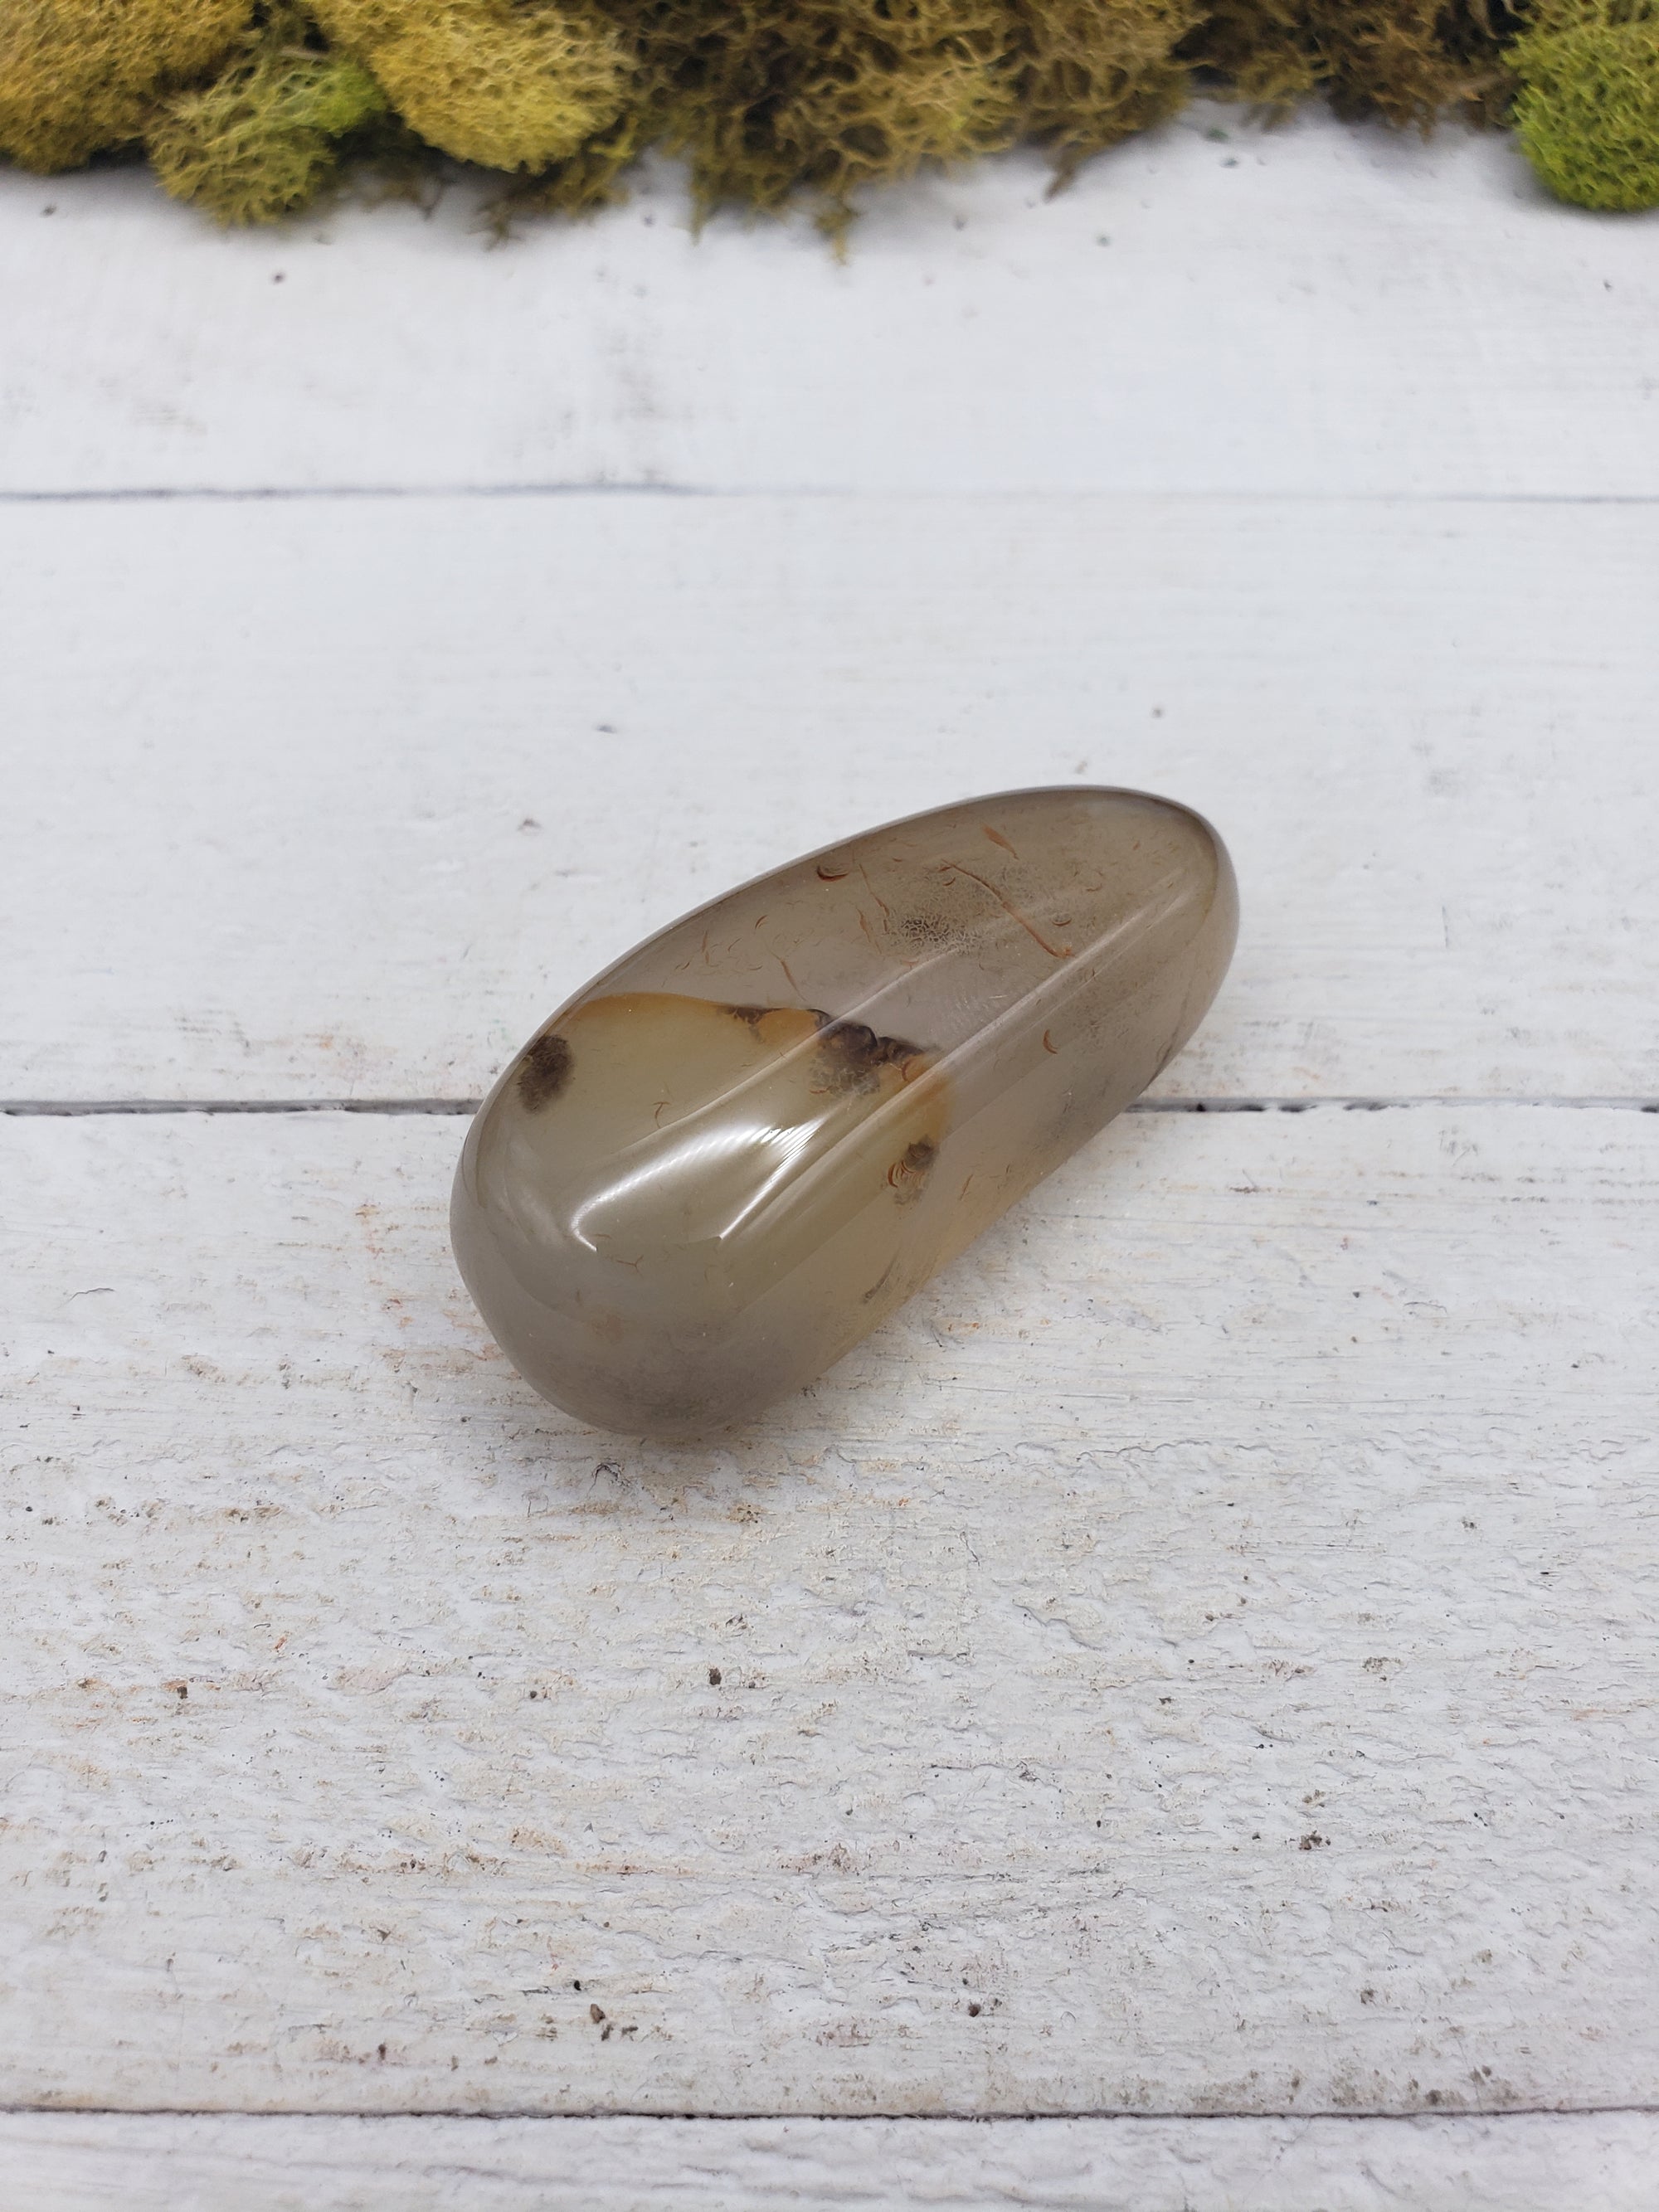 Unique Polished Agate Natural Crystal Palm Stone - JENNY 2